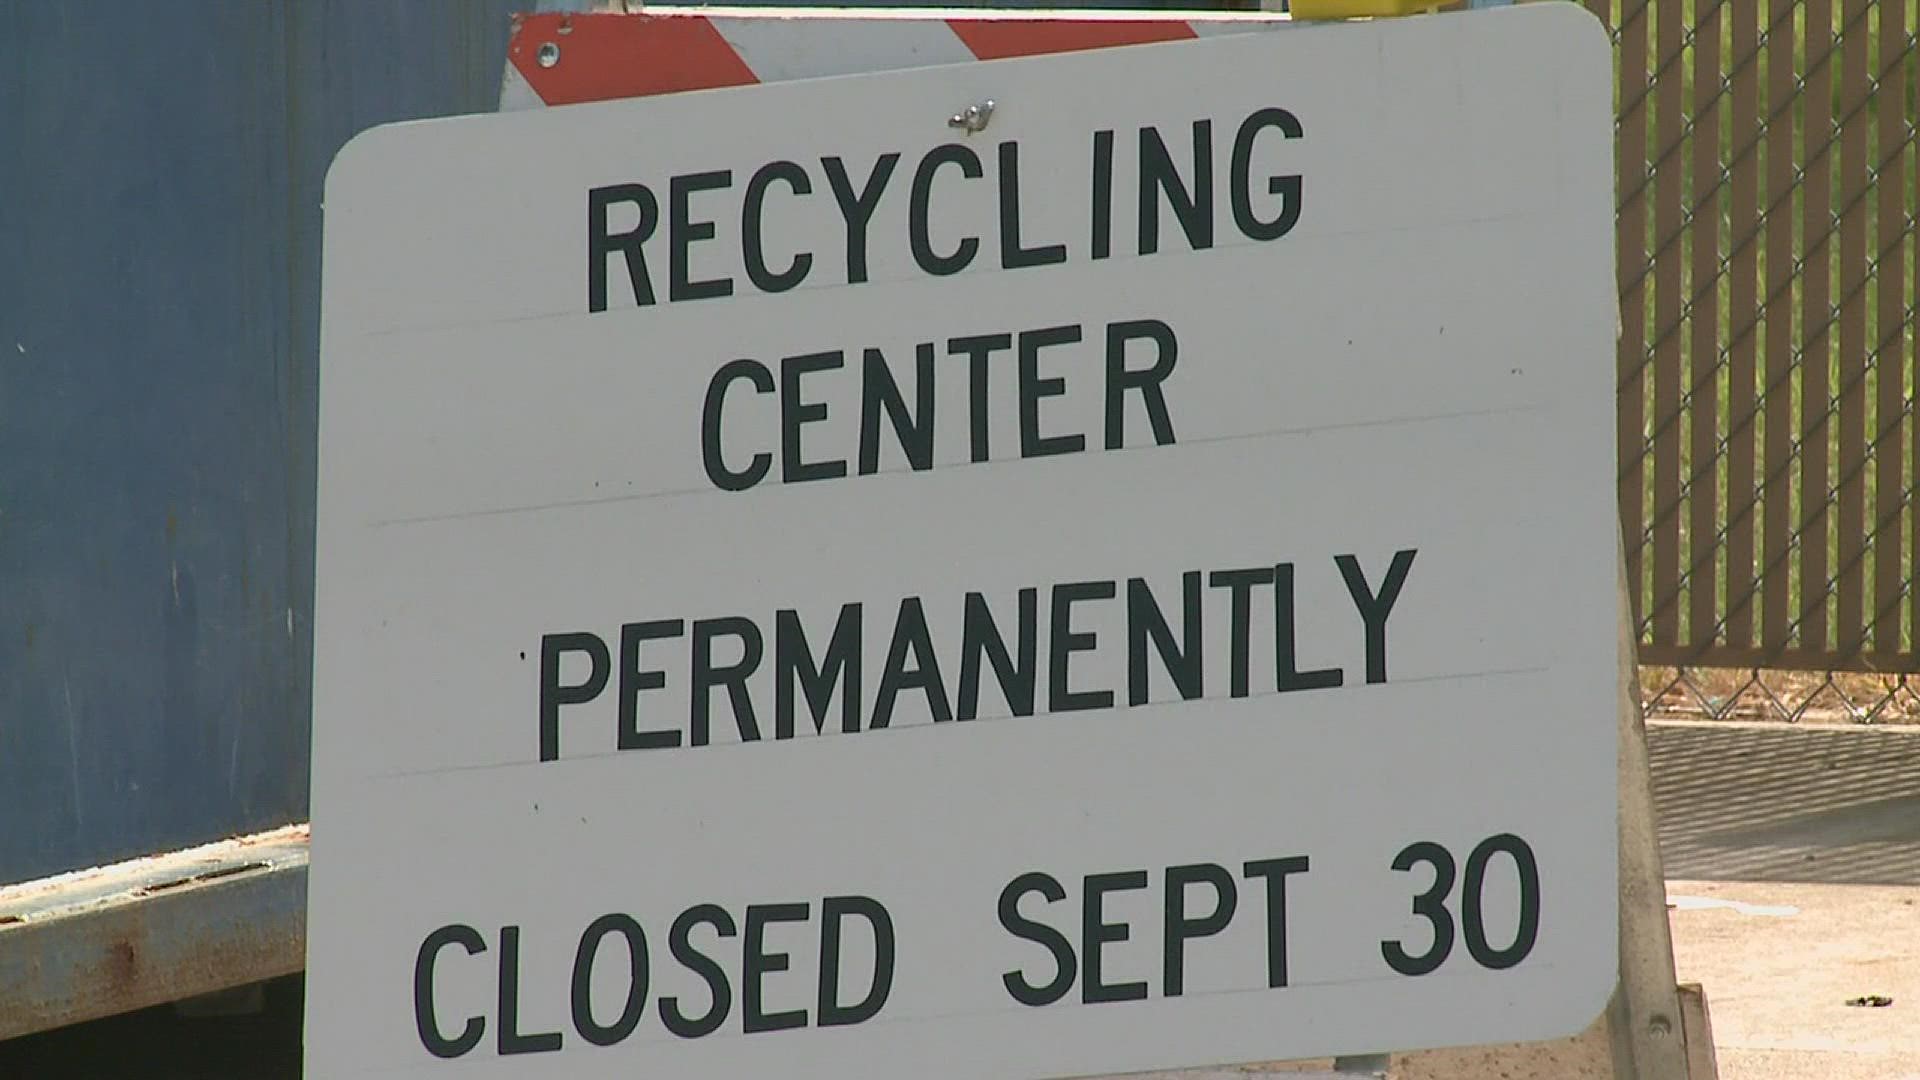 "If the drop off sites need to be closed, they need to be looking at other options to expand recycling."